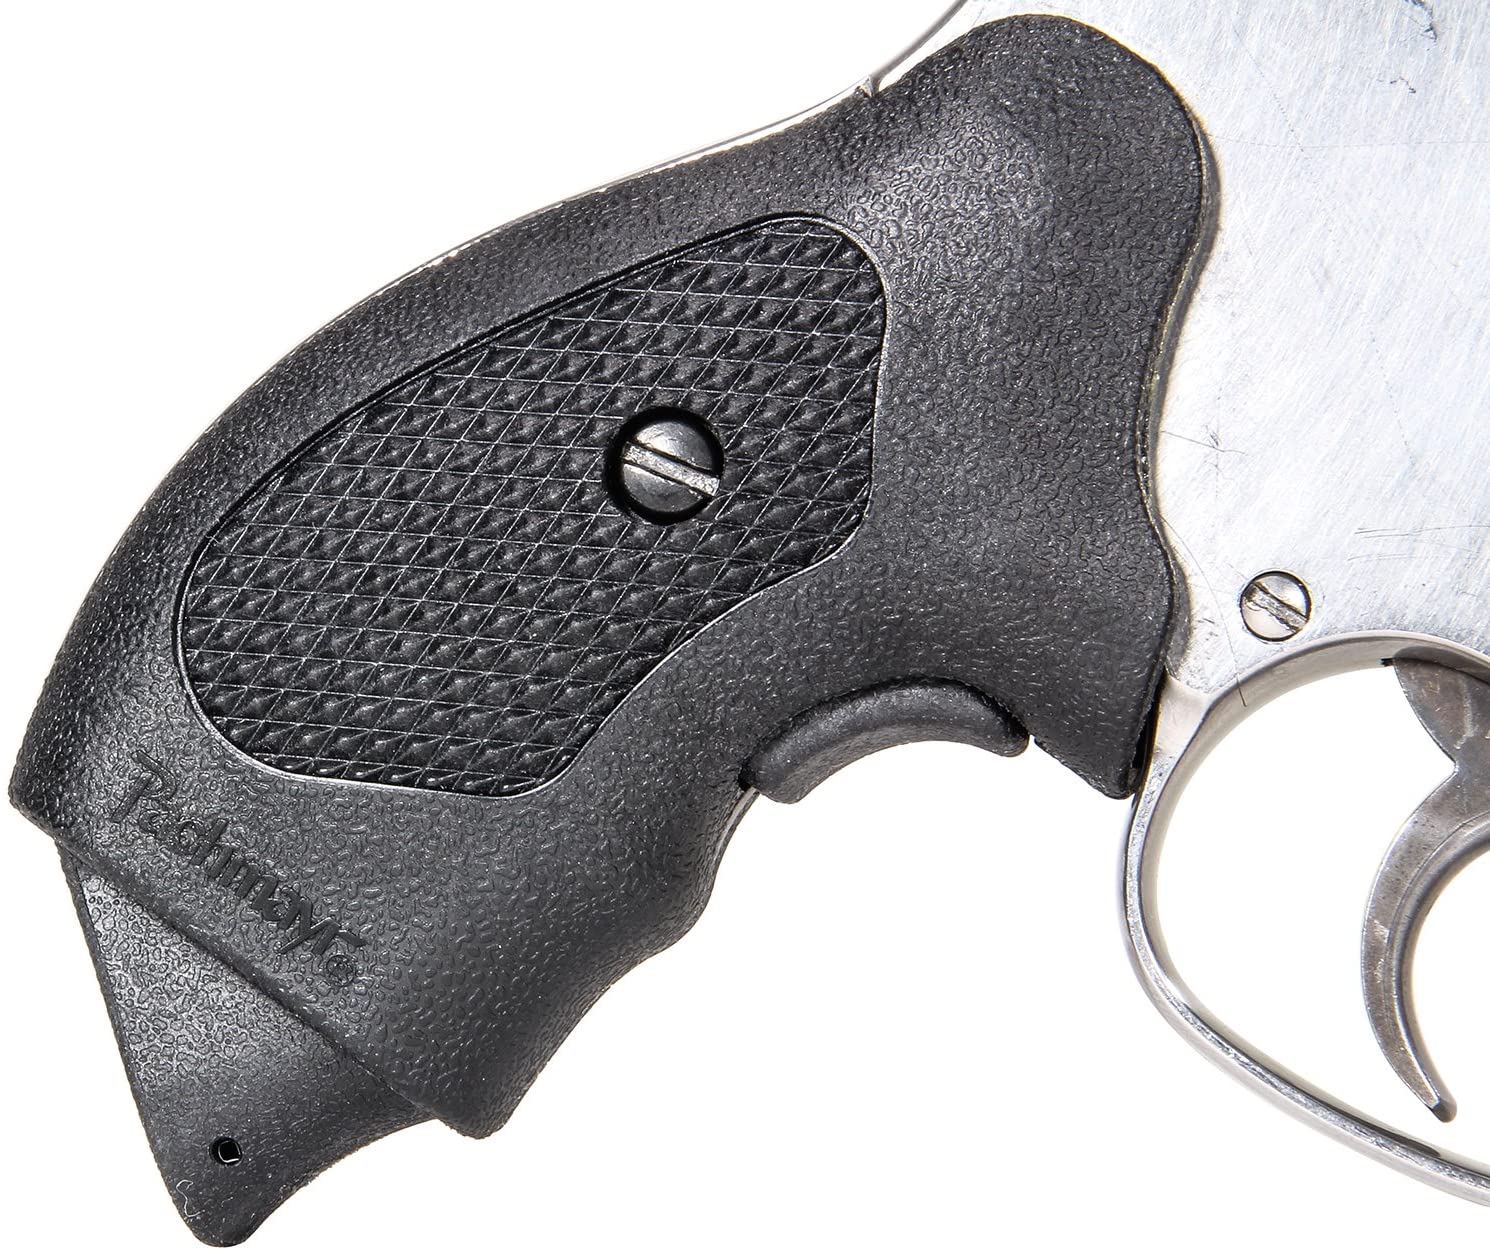 Pachmayr GuardianGrip S&W J-Frame Revolver Grip, with Spring-Loaded Grip Extender